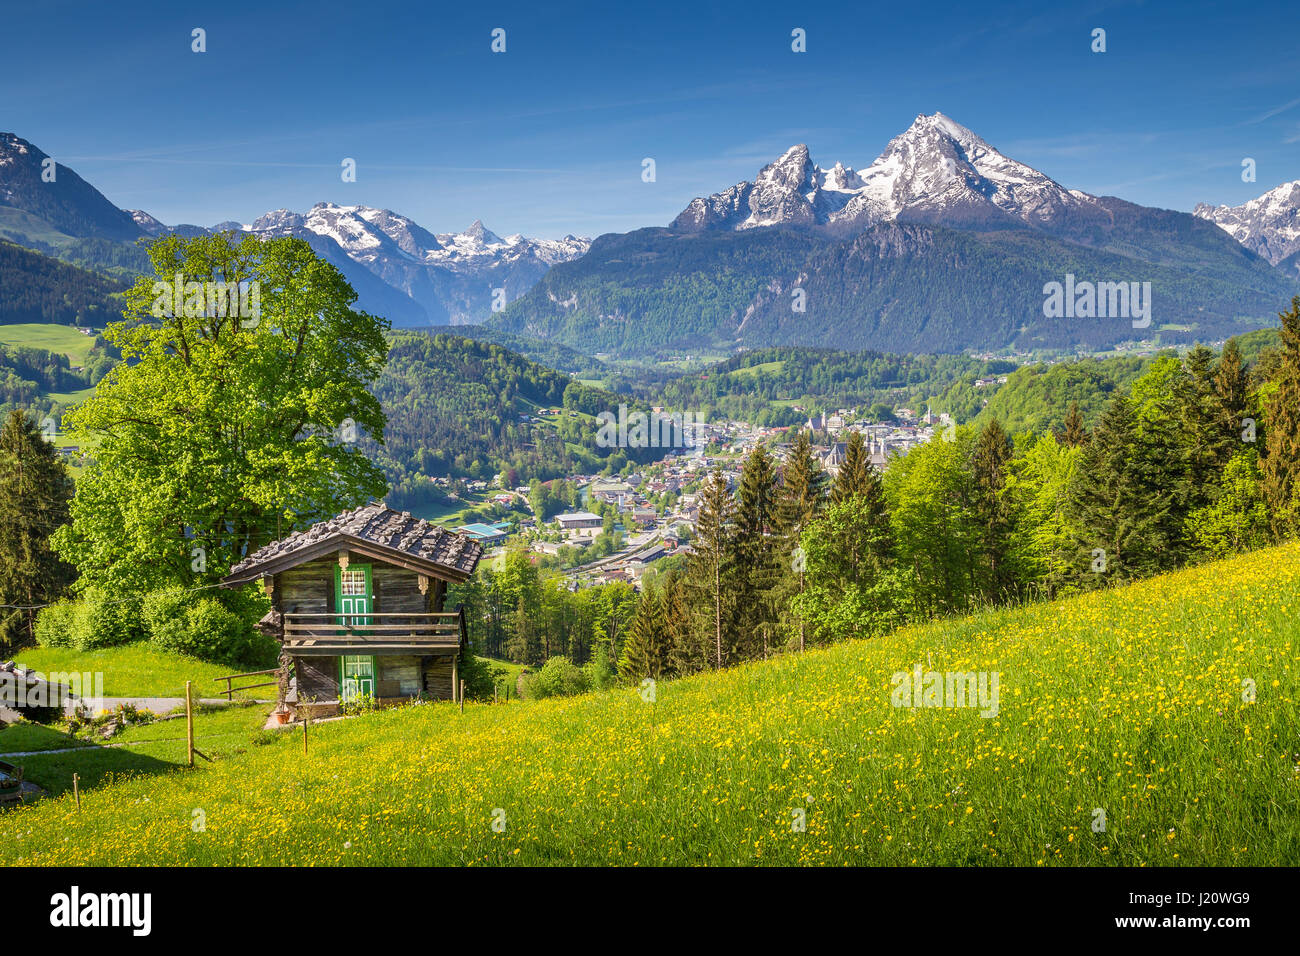 Panoramic view of idyllic mountain scenery in the Alps with traditional old wooden mountain chalet and fresh green blooming meadows in springtime Stock Photo